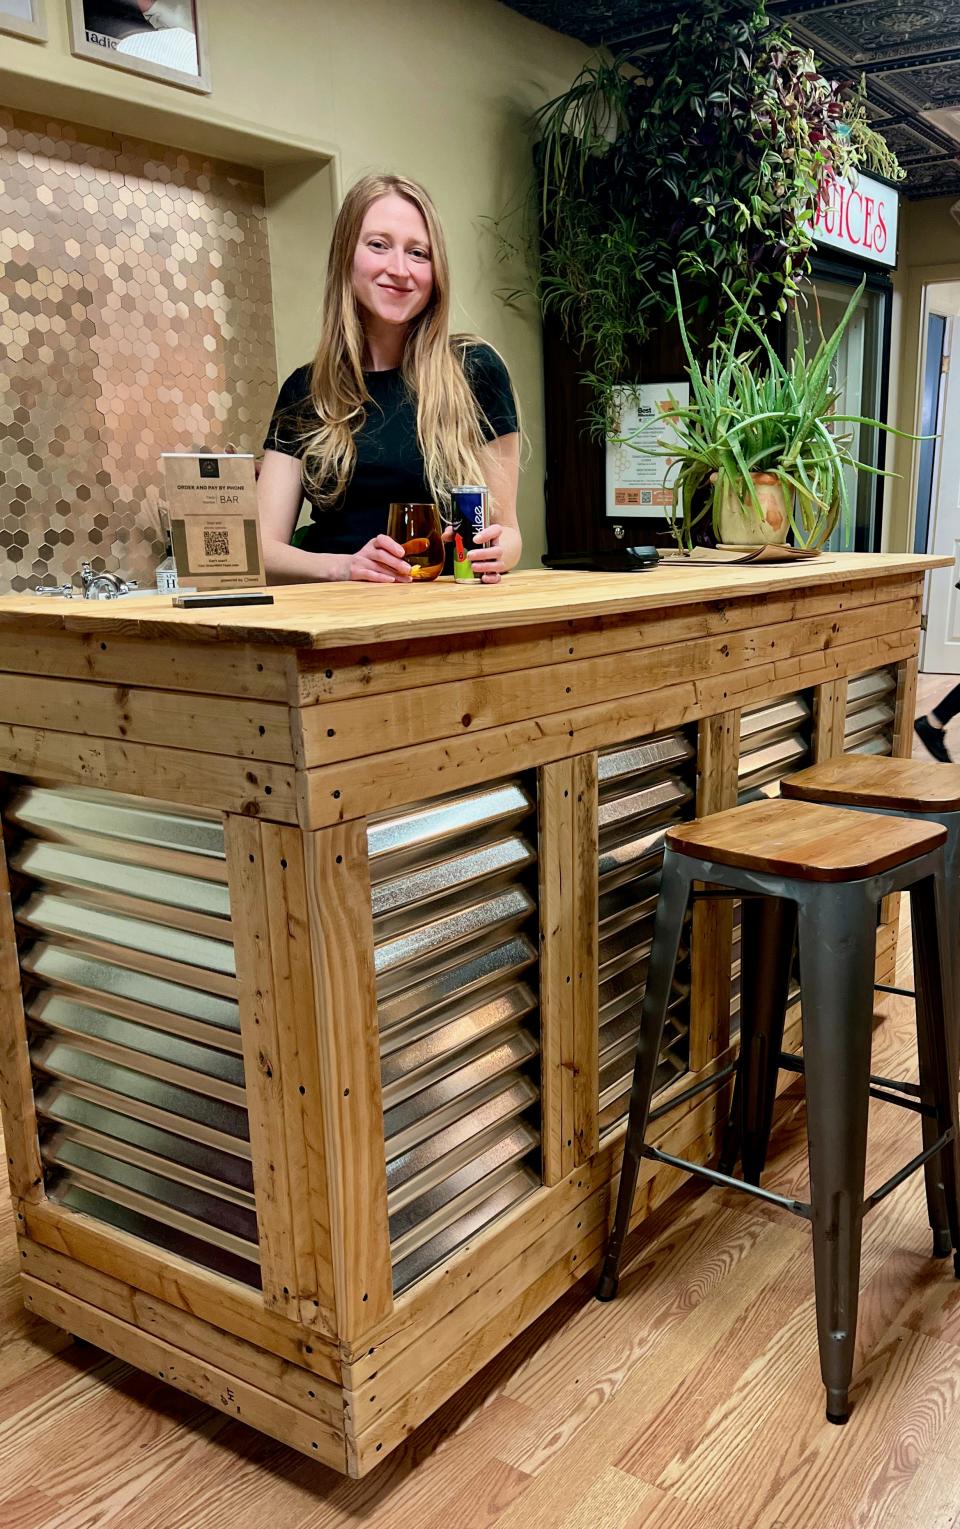 Madeleine Schweitzer, Flour Girl and Flame’s general manager, at the storefront dining room's petite bar. The pizzeria has canned wine and beer, as well as a few wines by the bottle, as well as Wisconsin-made shrubs, kombucha and soda.